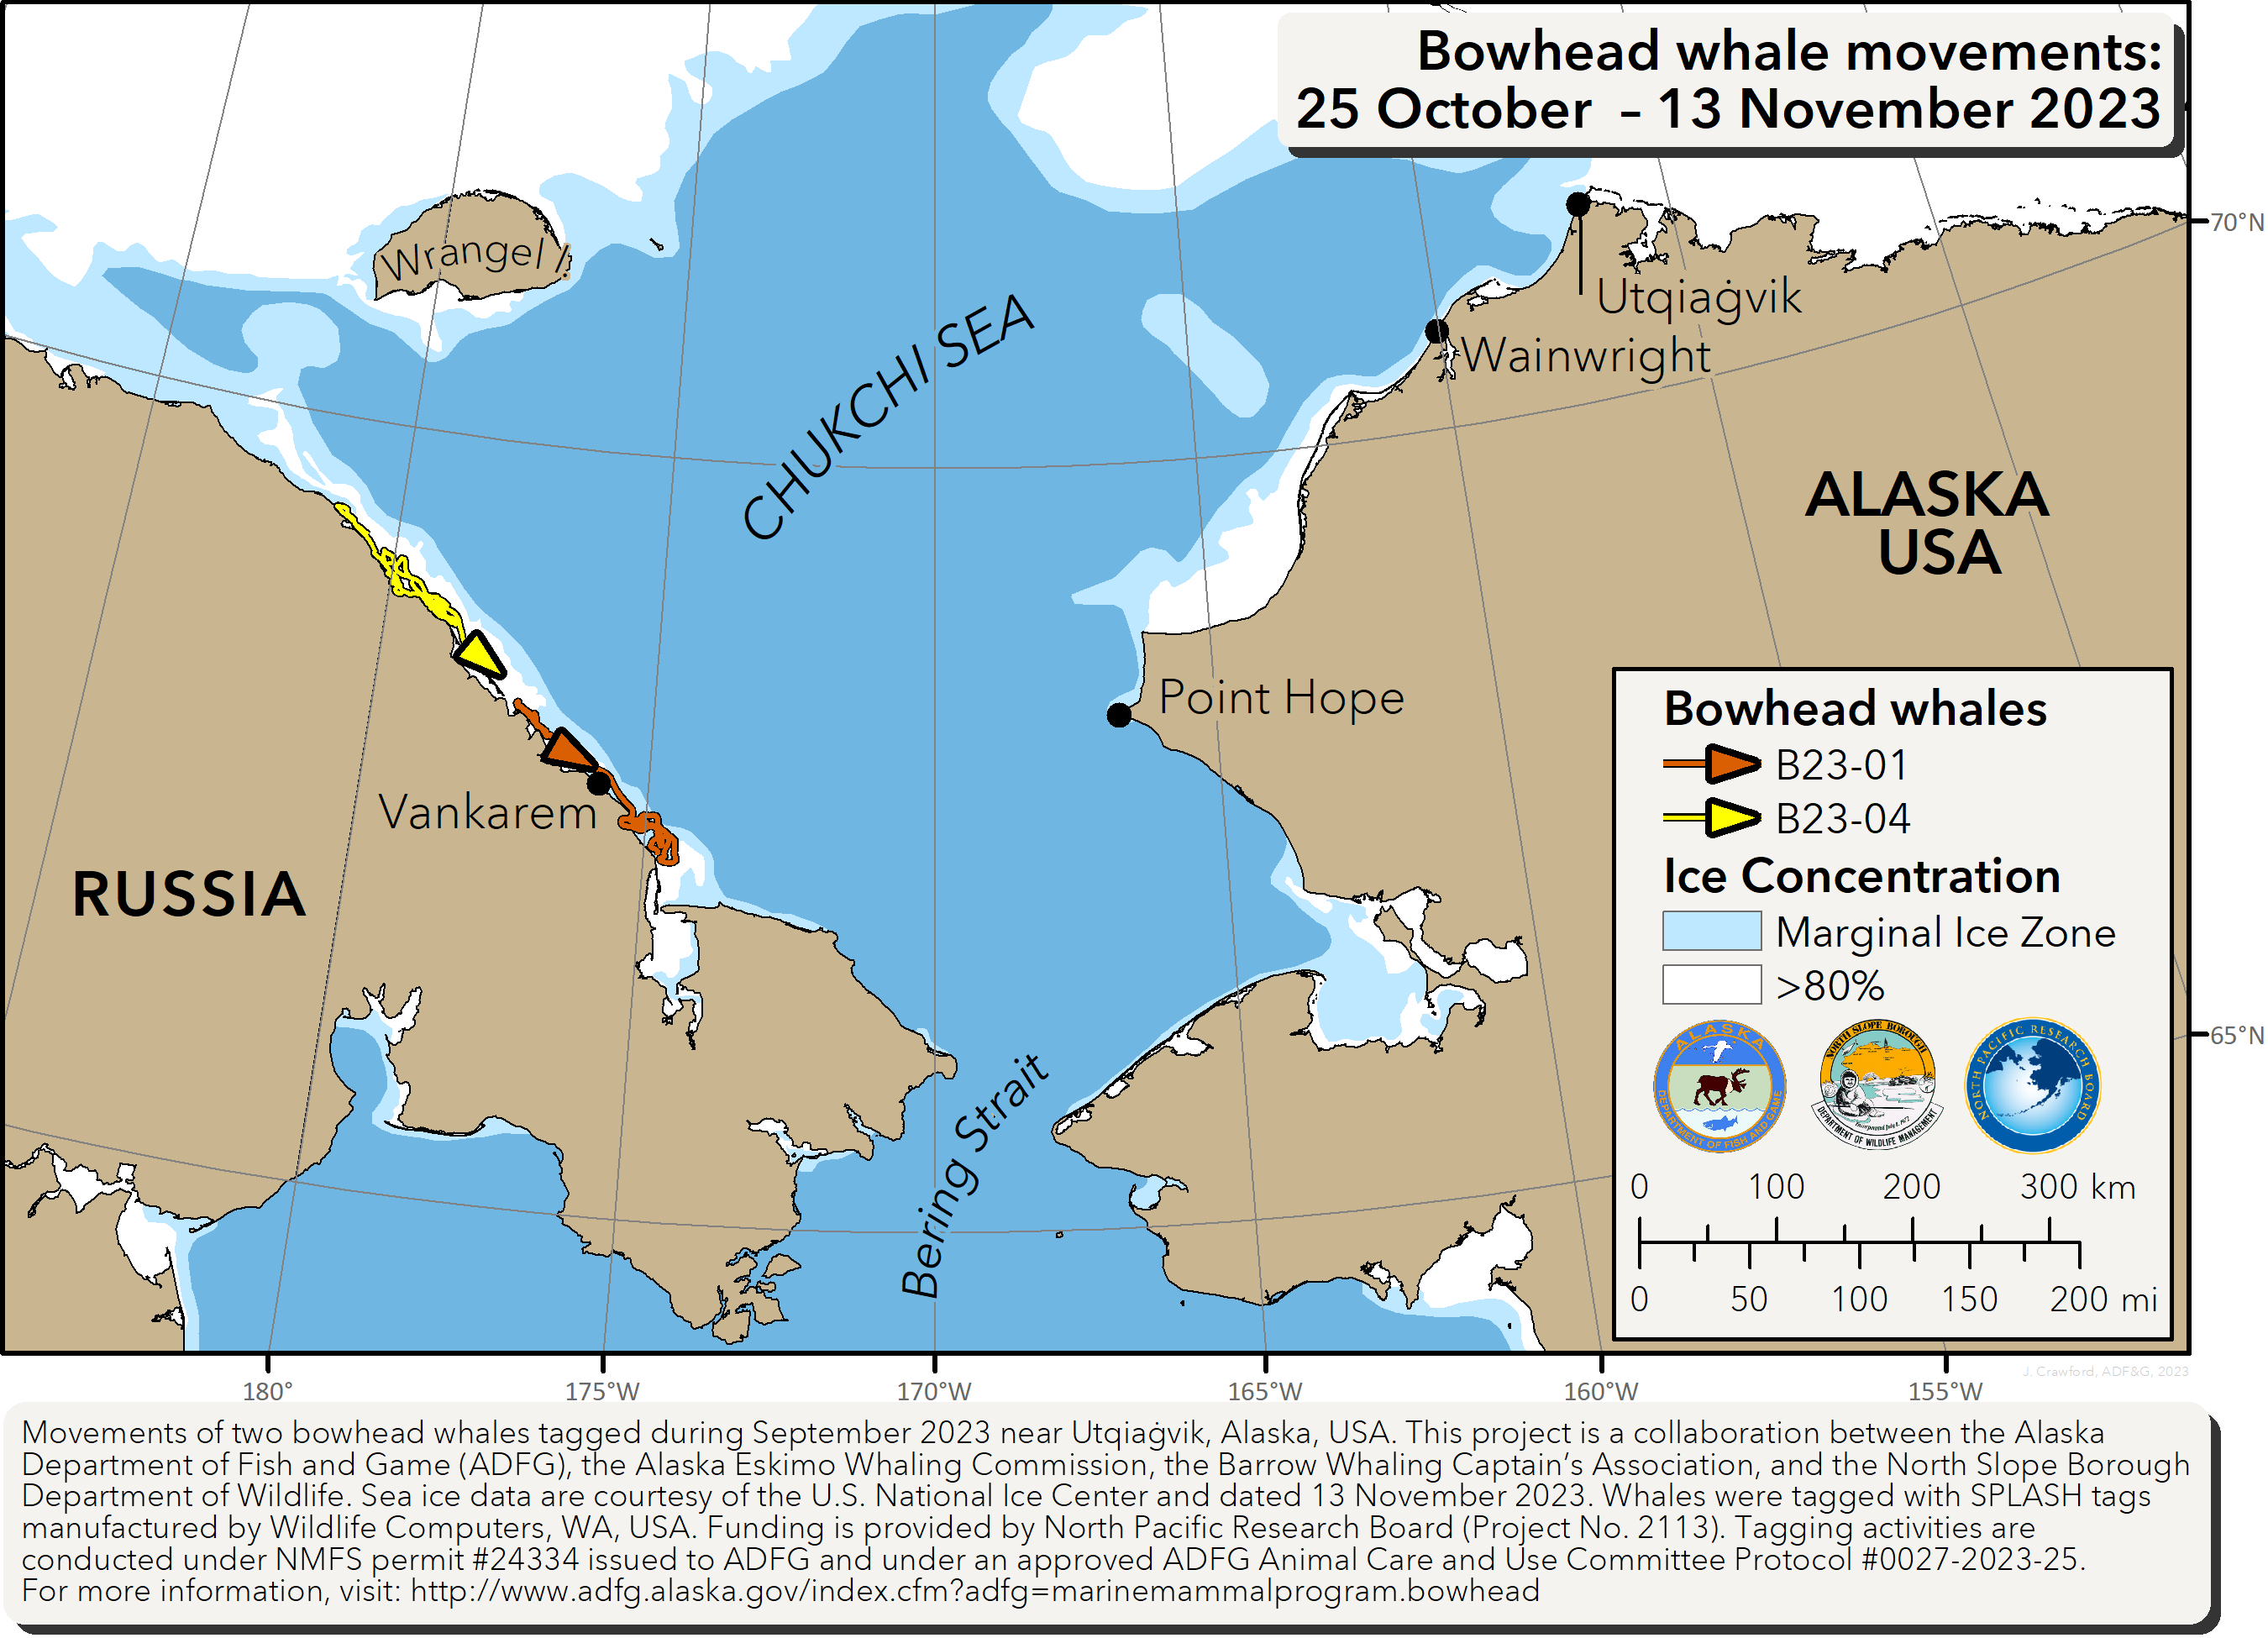 Map tracking bowhead whale movements between 10/25/2023 – 11/13/2023